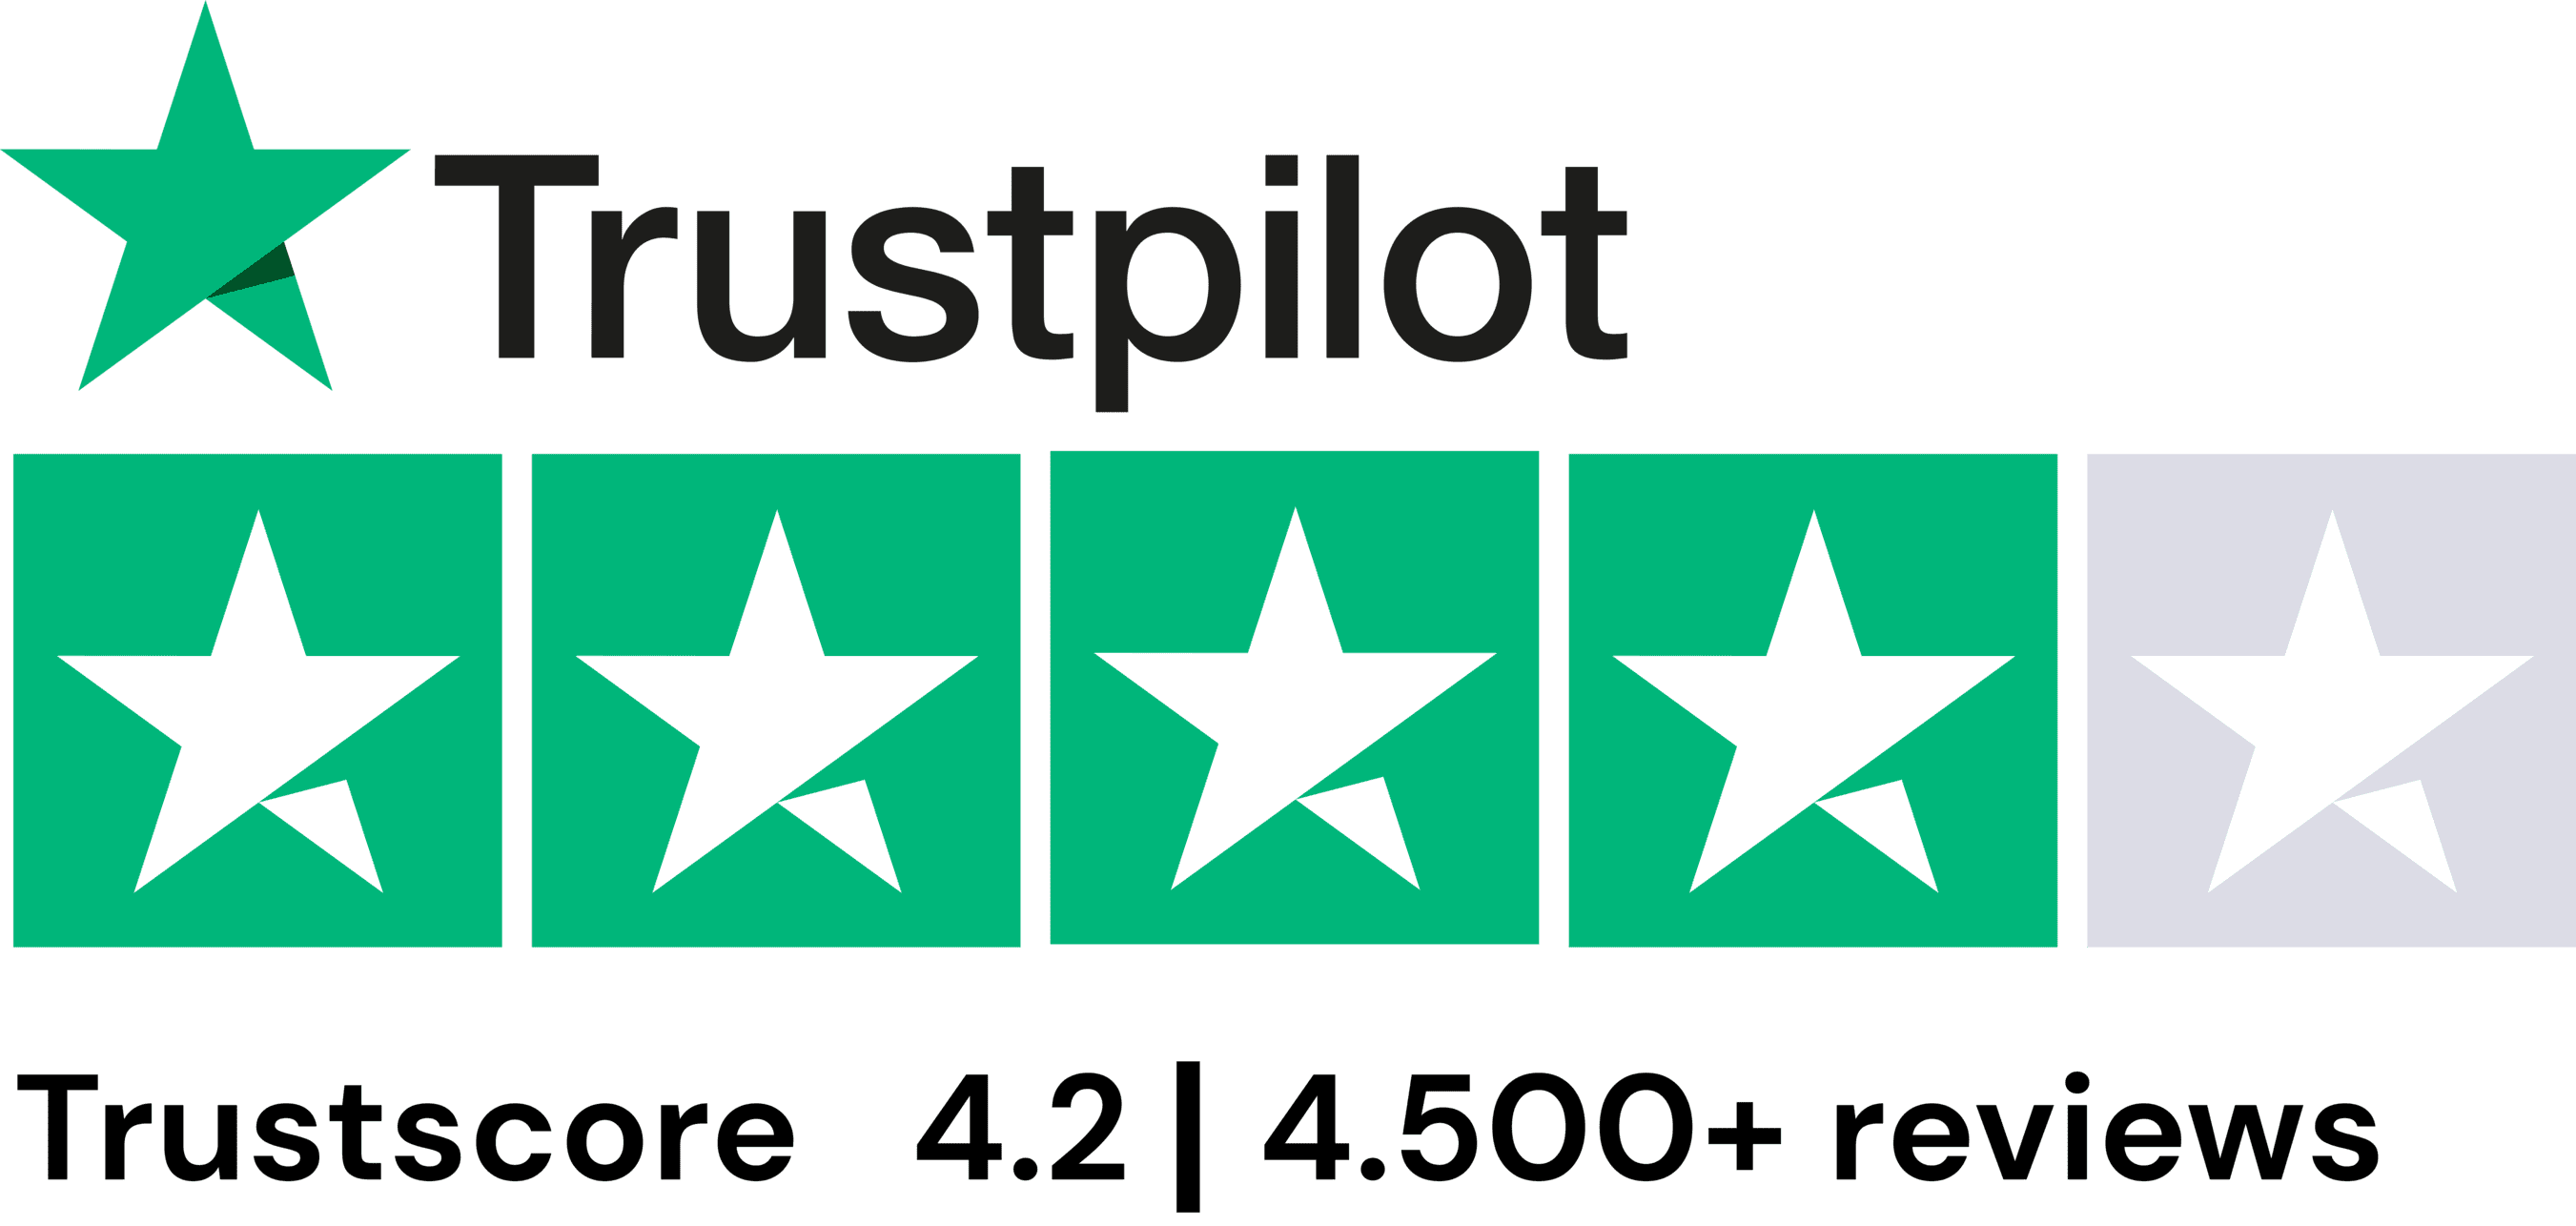 Baltini Is Rated Great on trustpilot